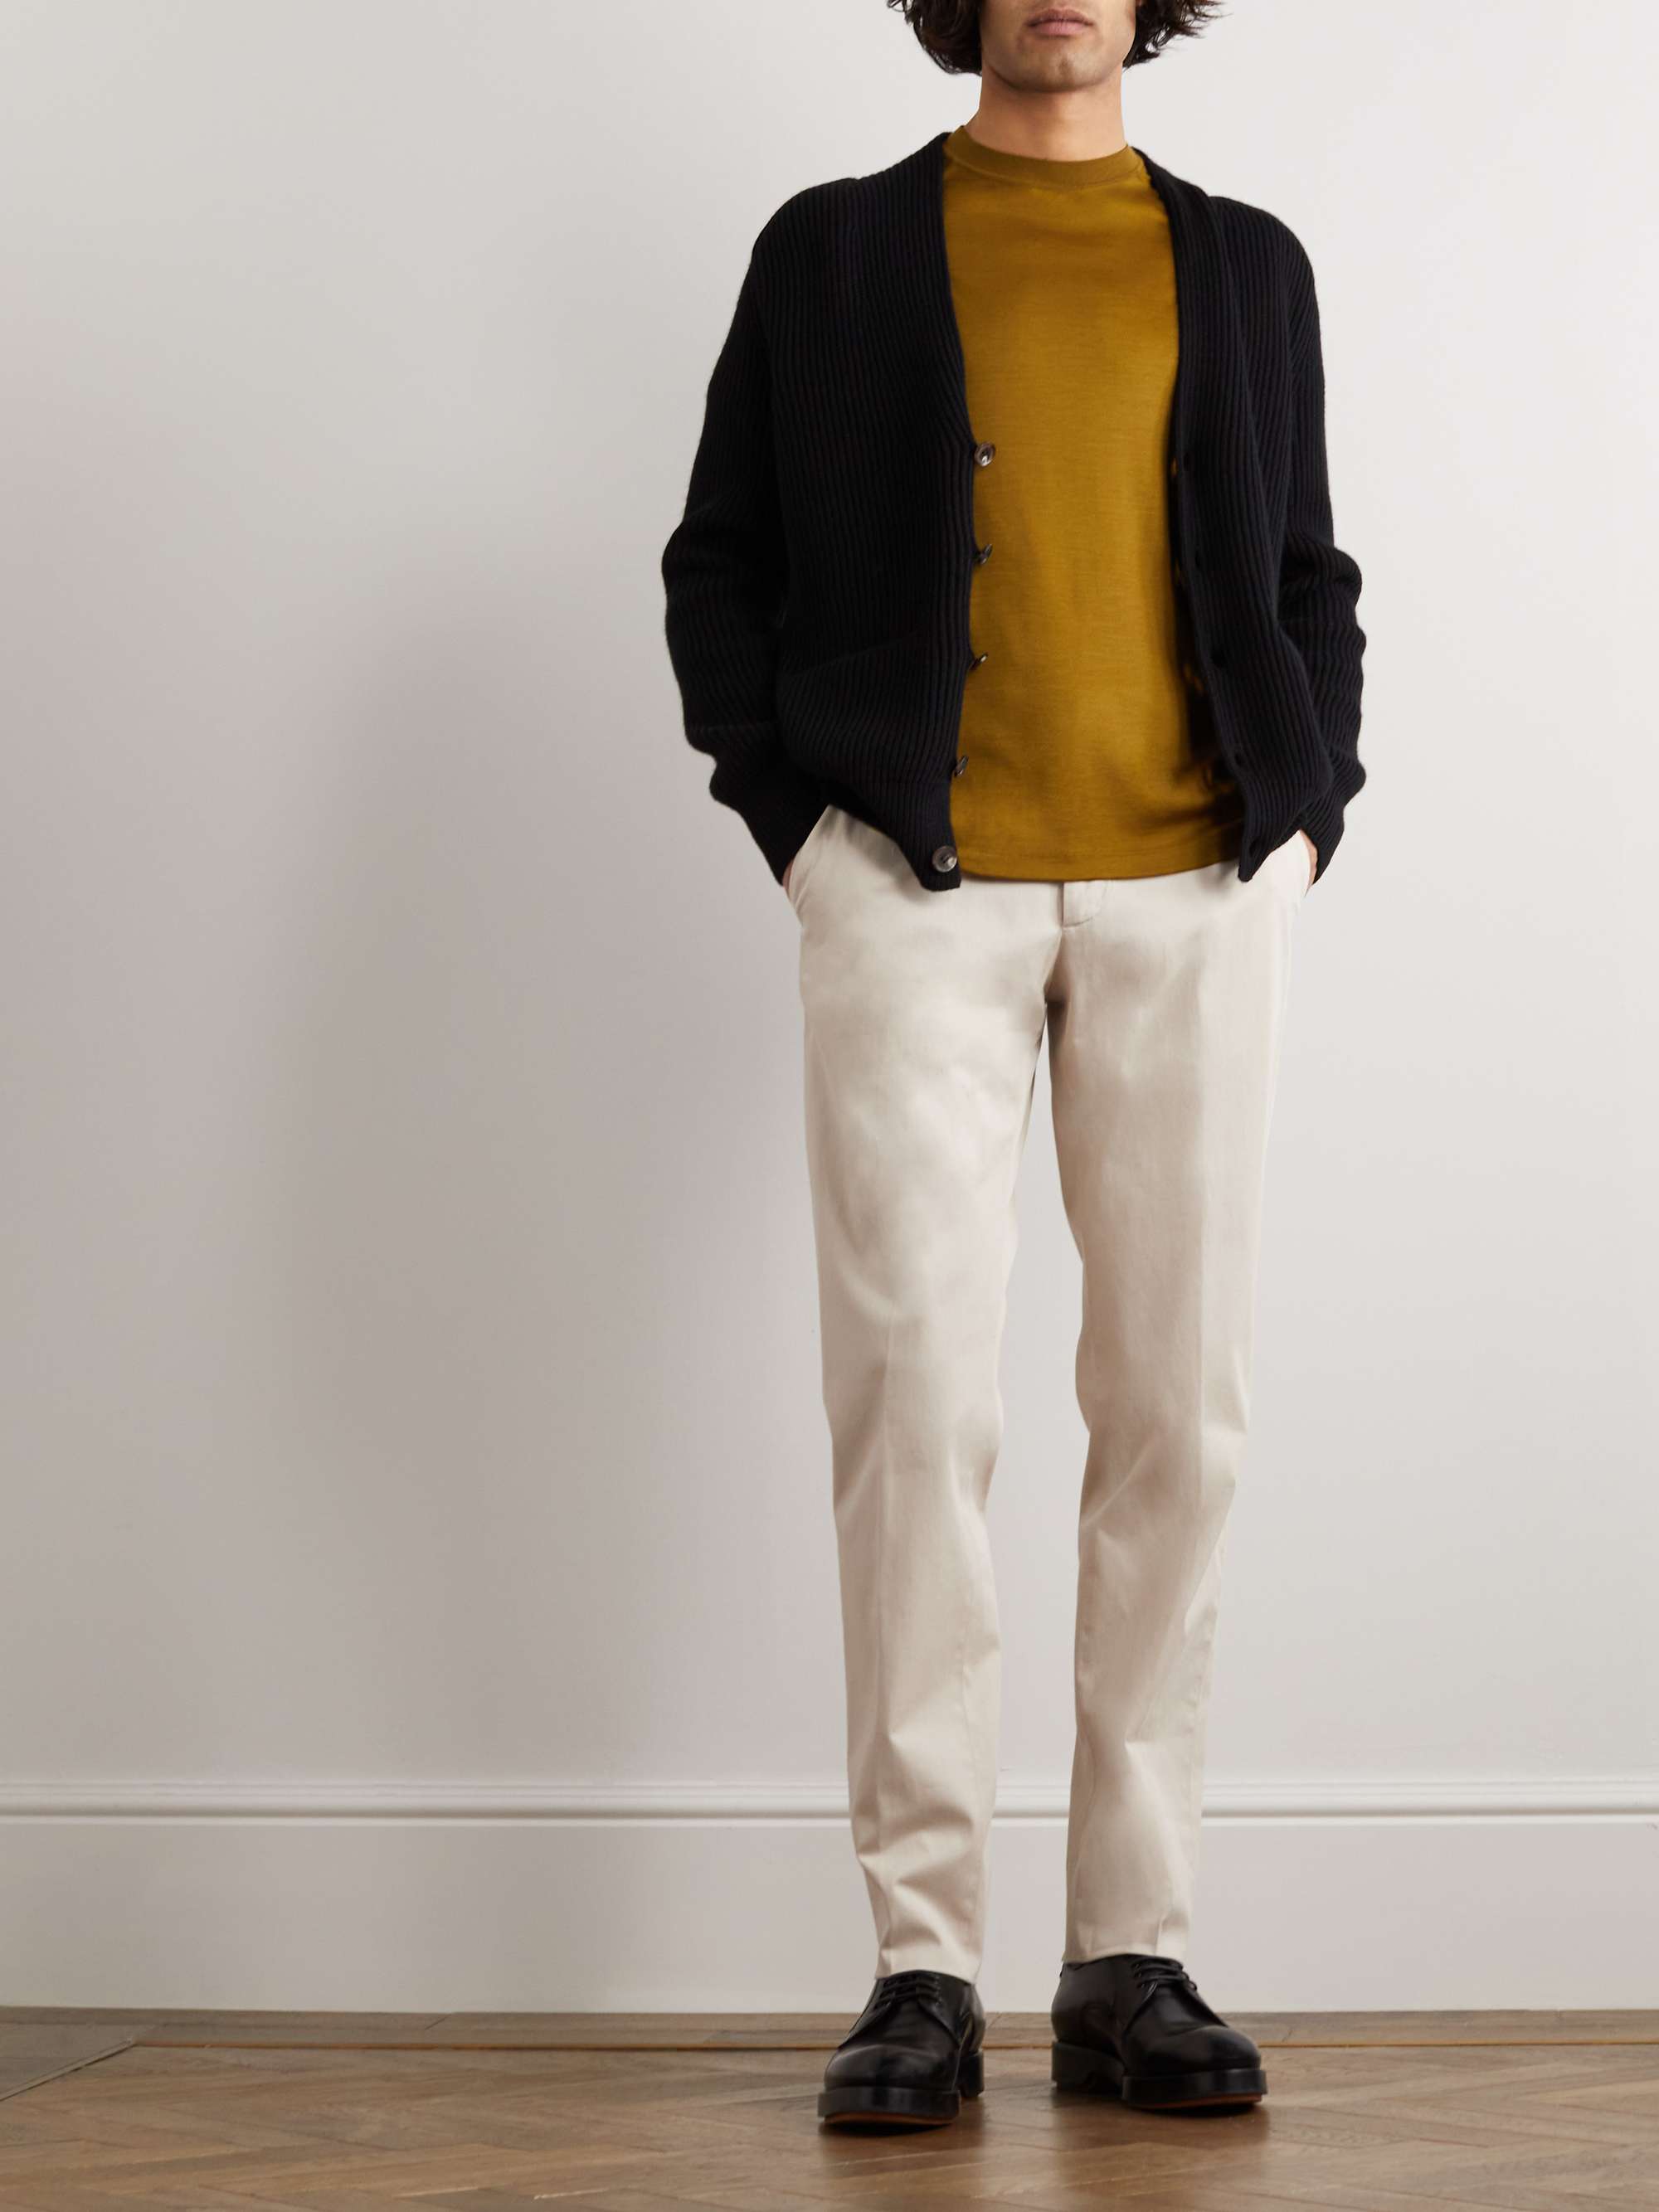 ZEGNA Slim-Fit Stretch-Cotton Twill Trousers